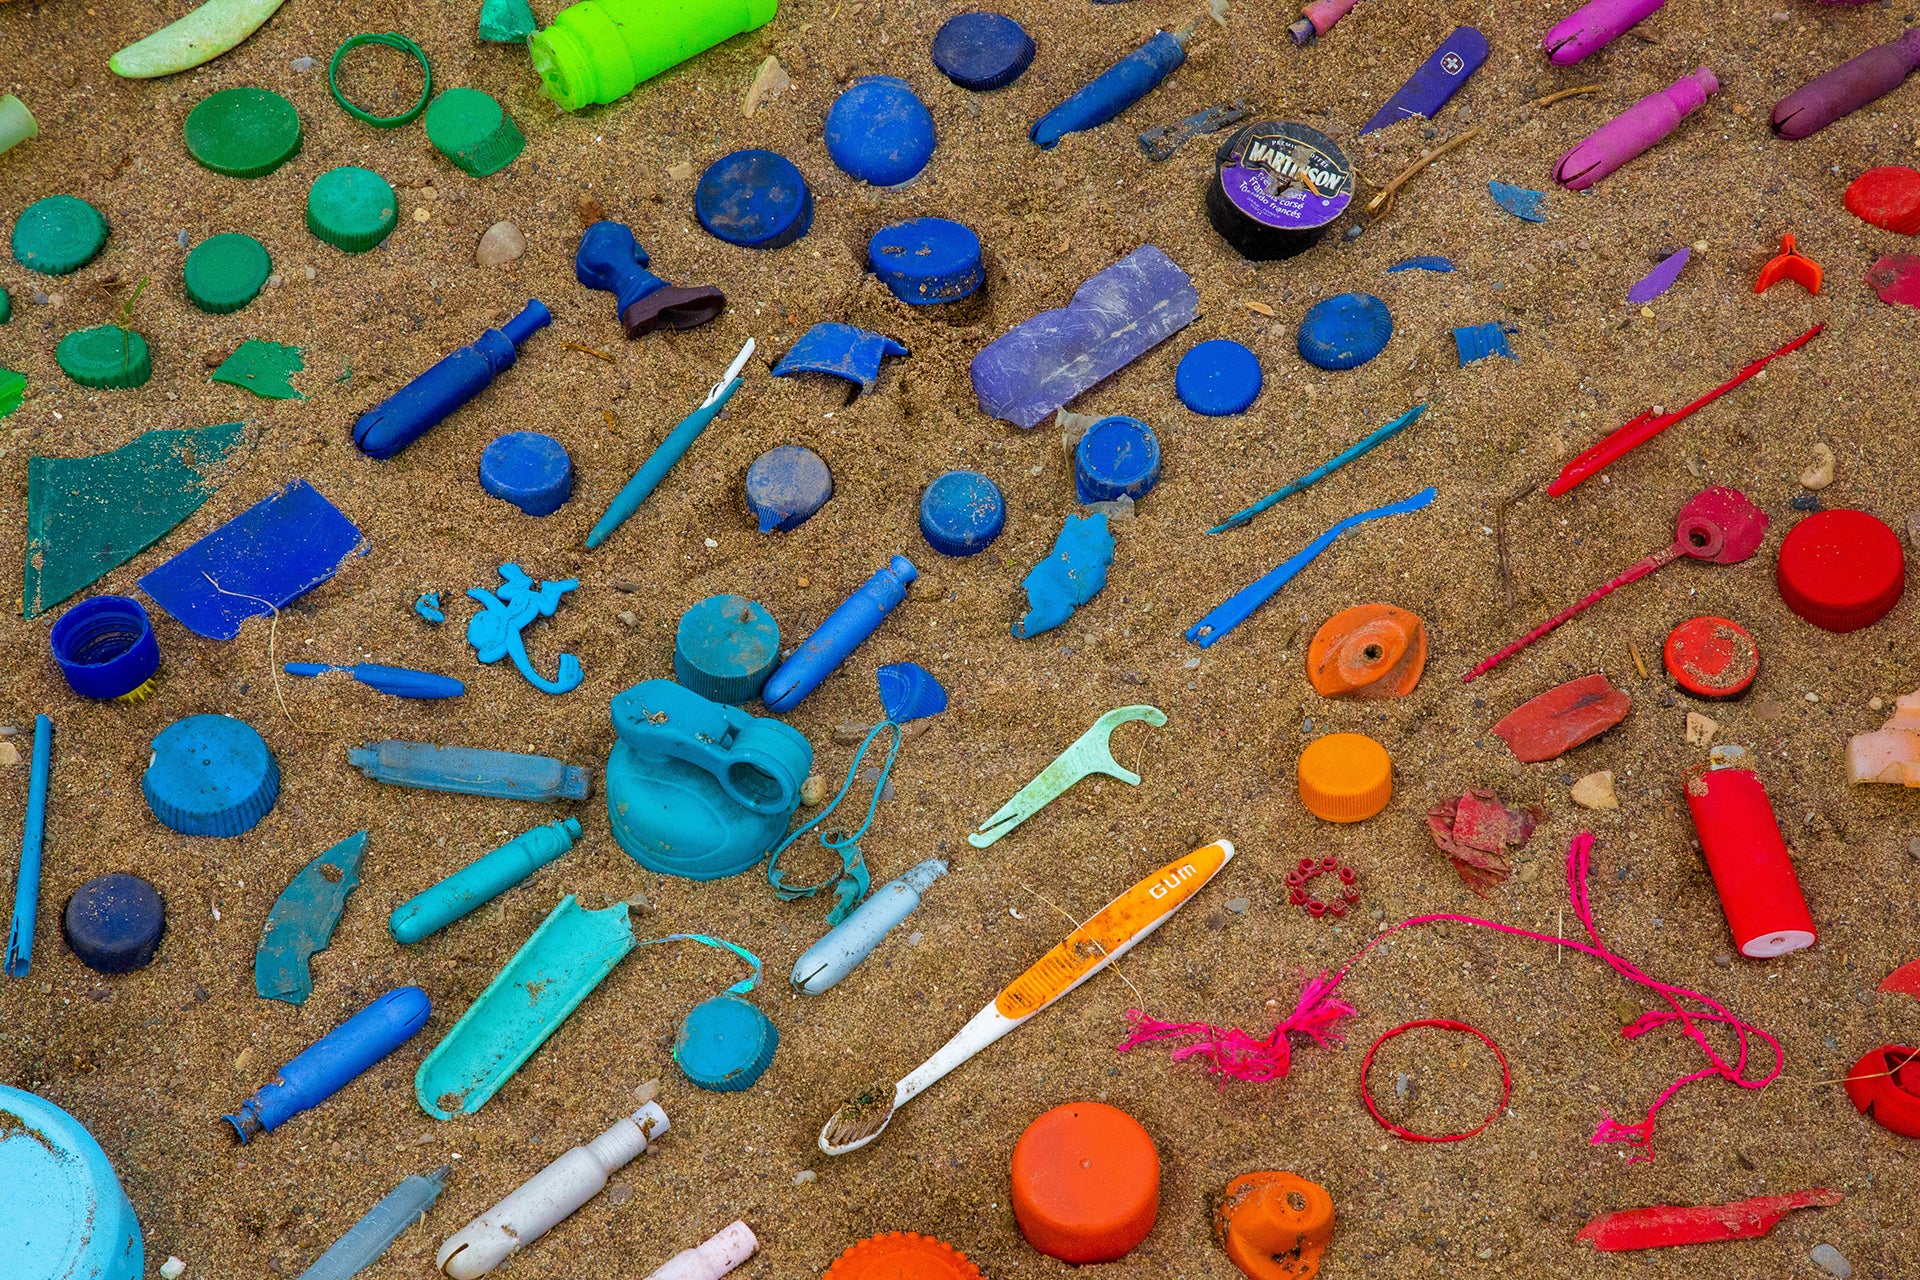 PLASTIC POLLUTION - WHY IS IT A BIG PROBLEM?!